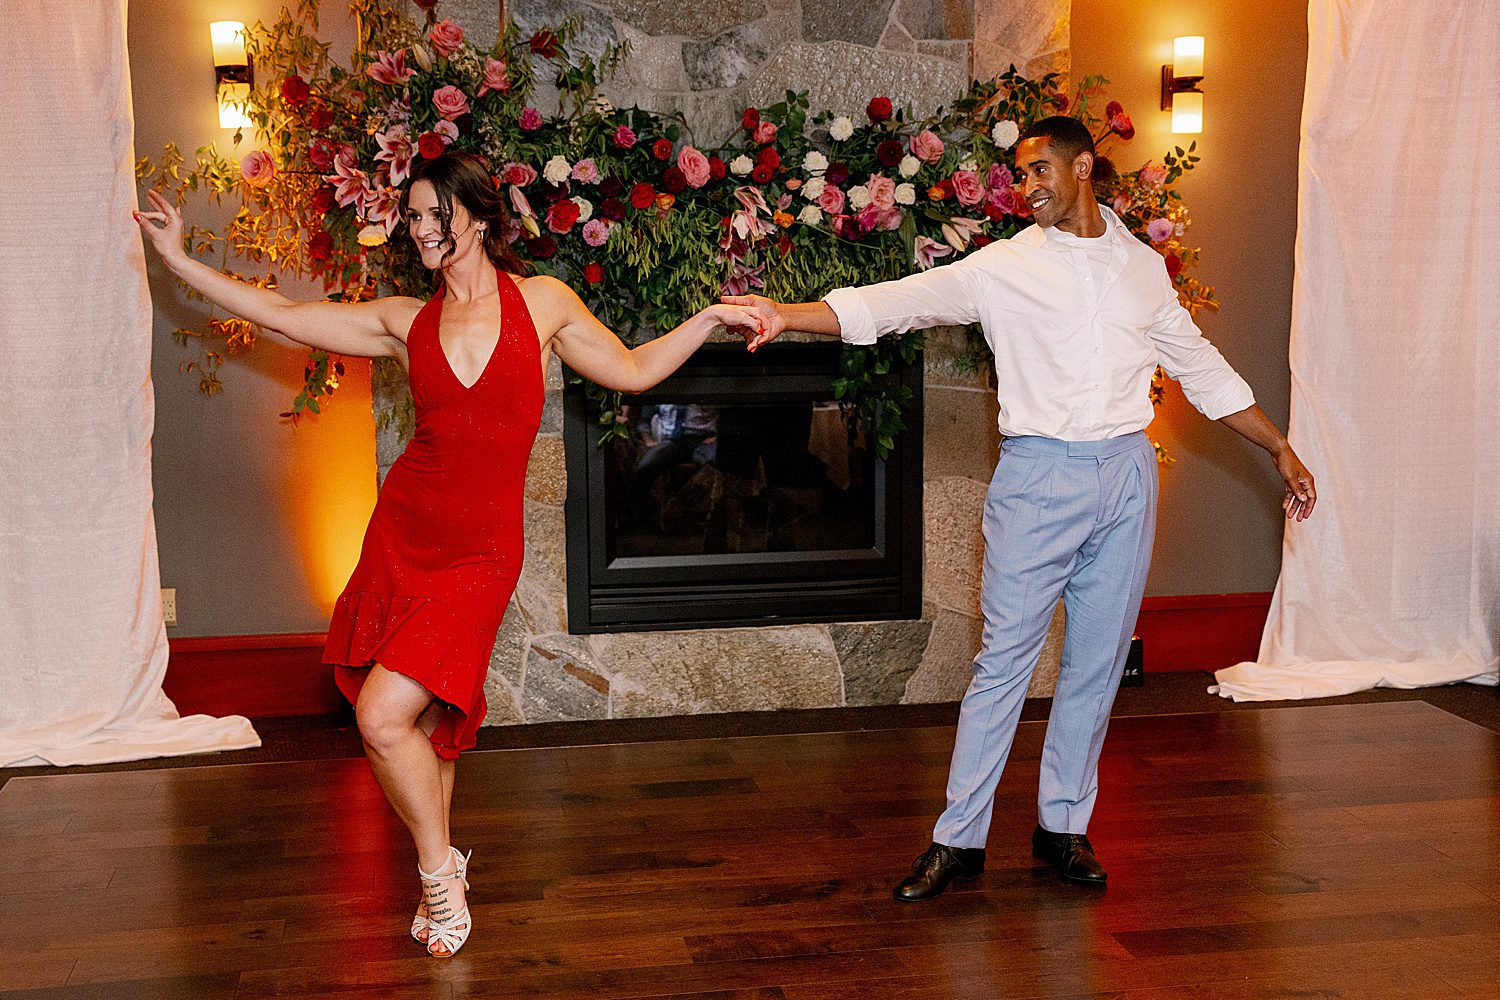 a woman in a red dress dances with a man in front of colorful mantle florals